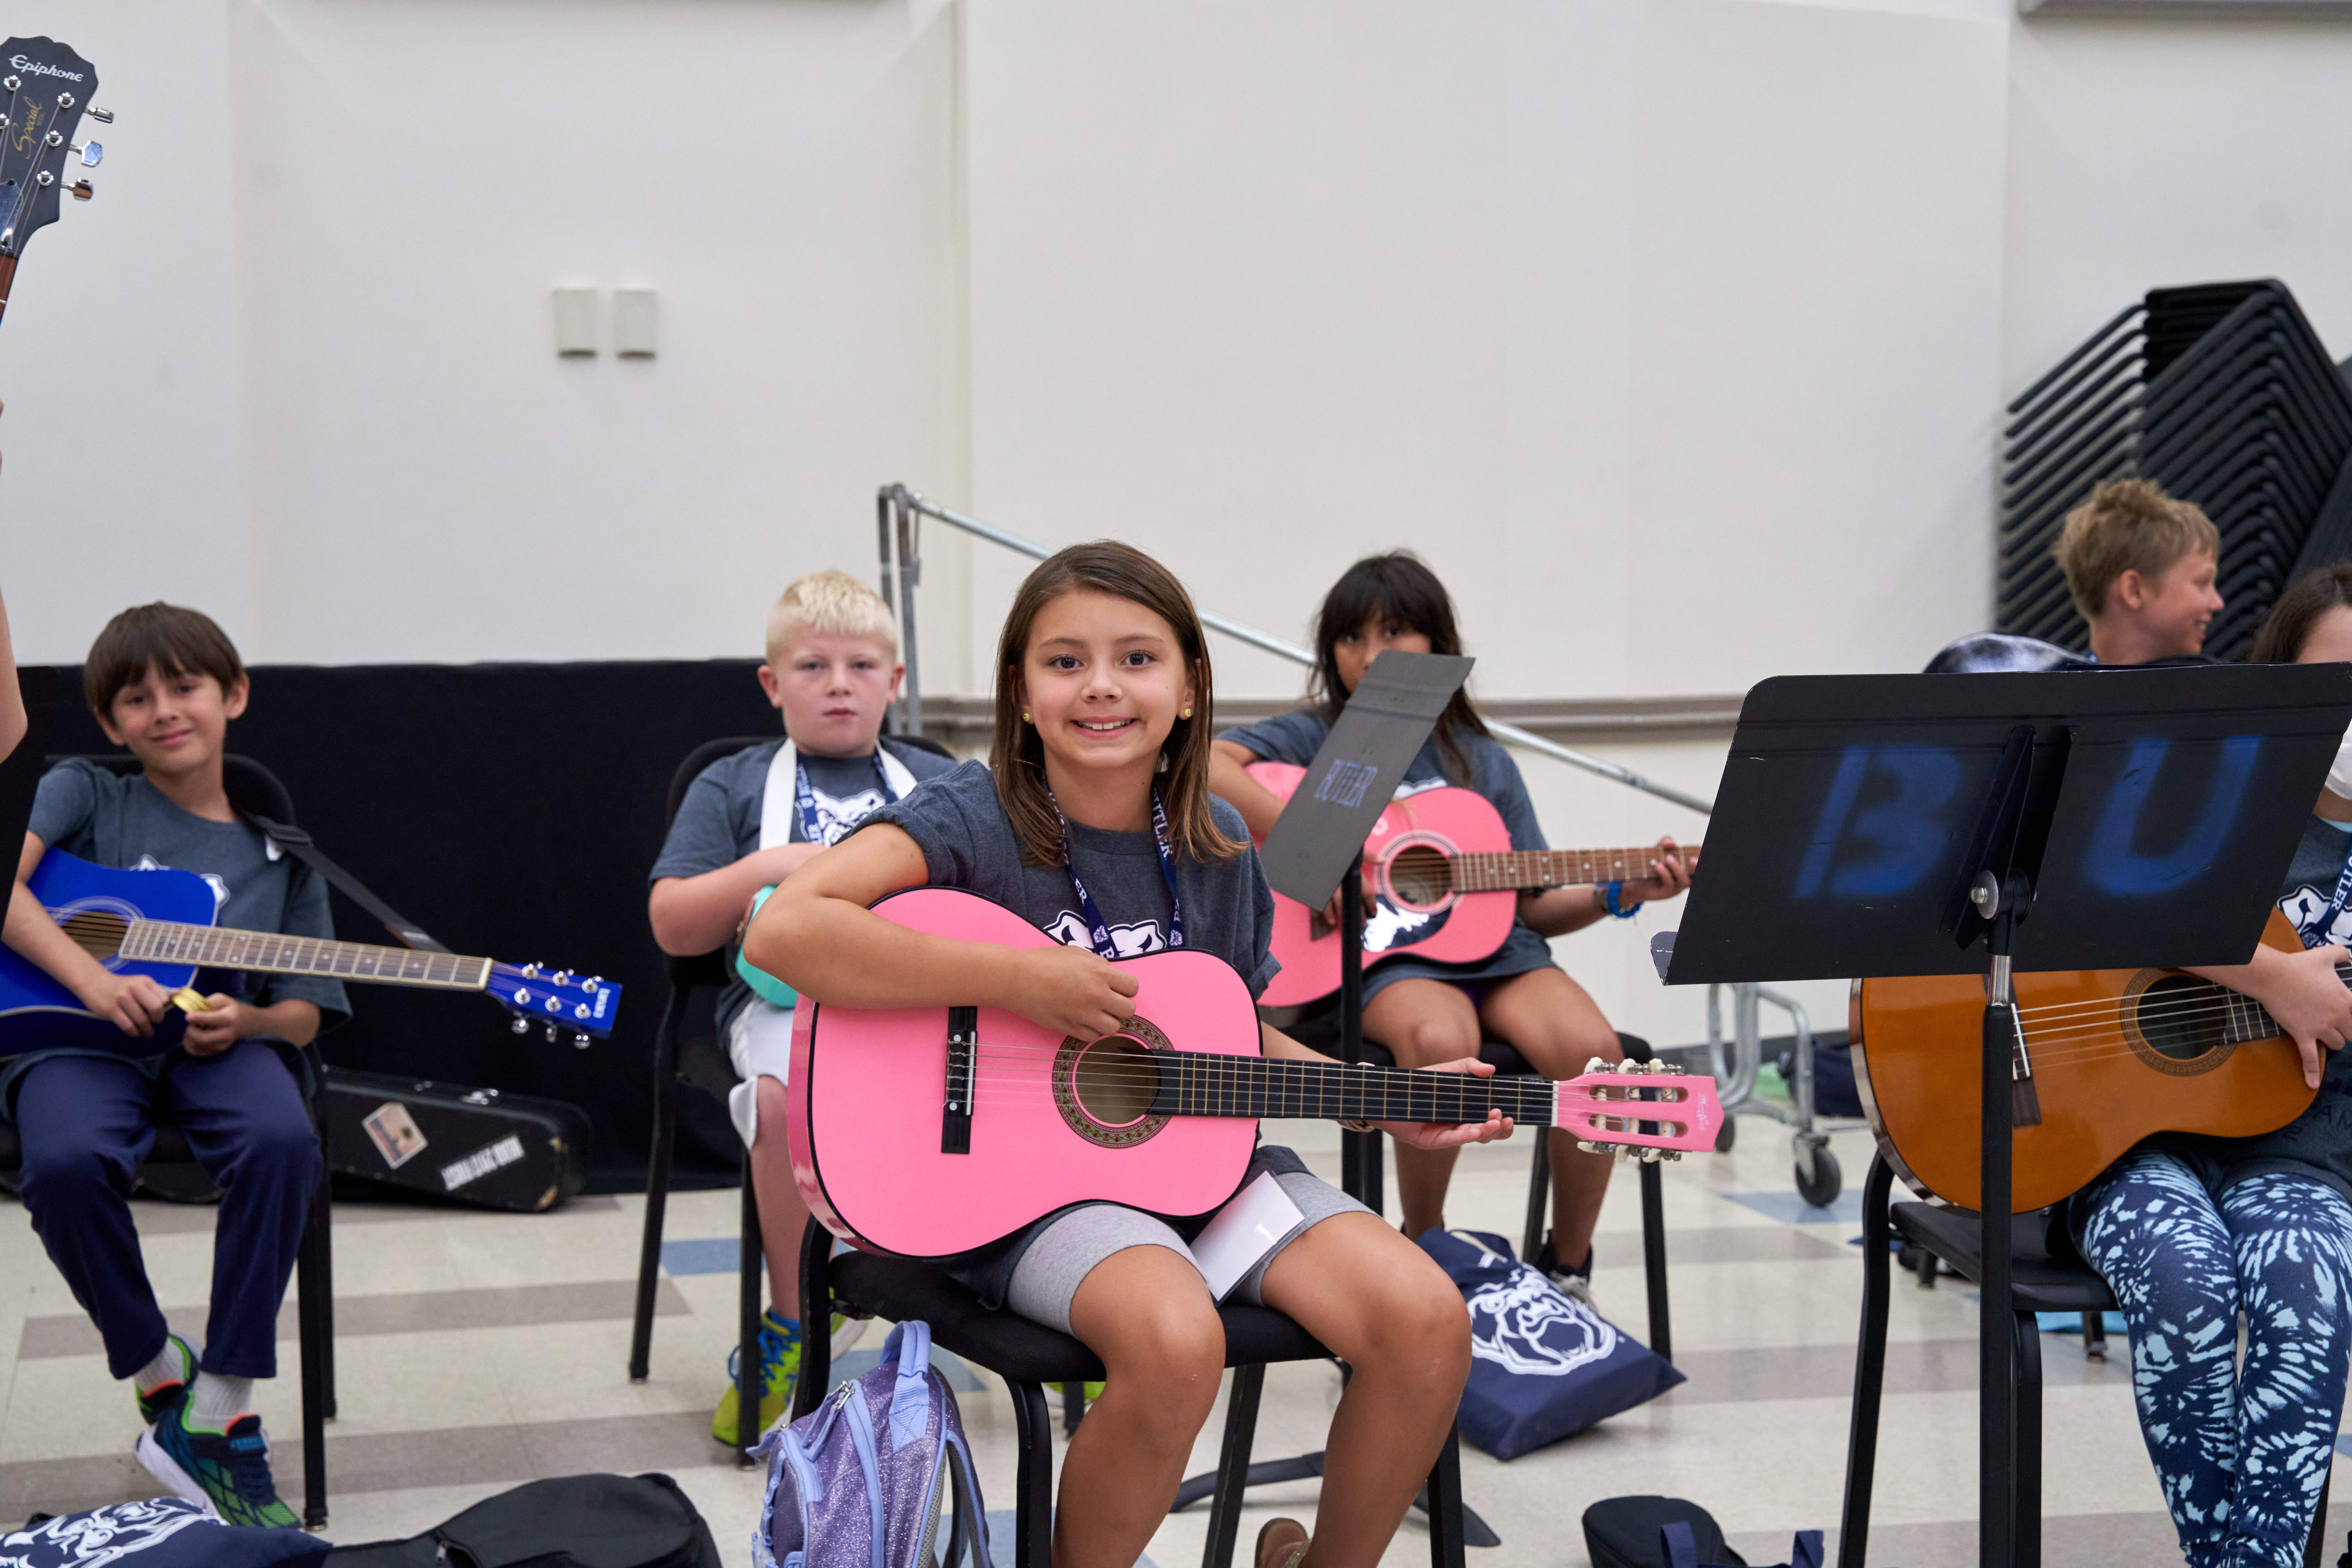 A class of elementary-aged BCAS students learning guitar. One student in the foreground is smiling at the camera